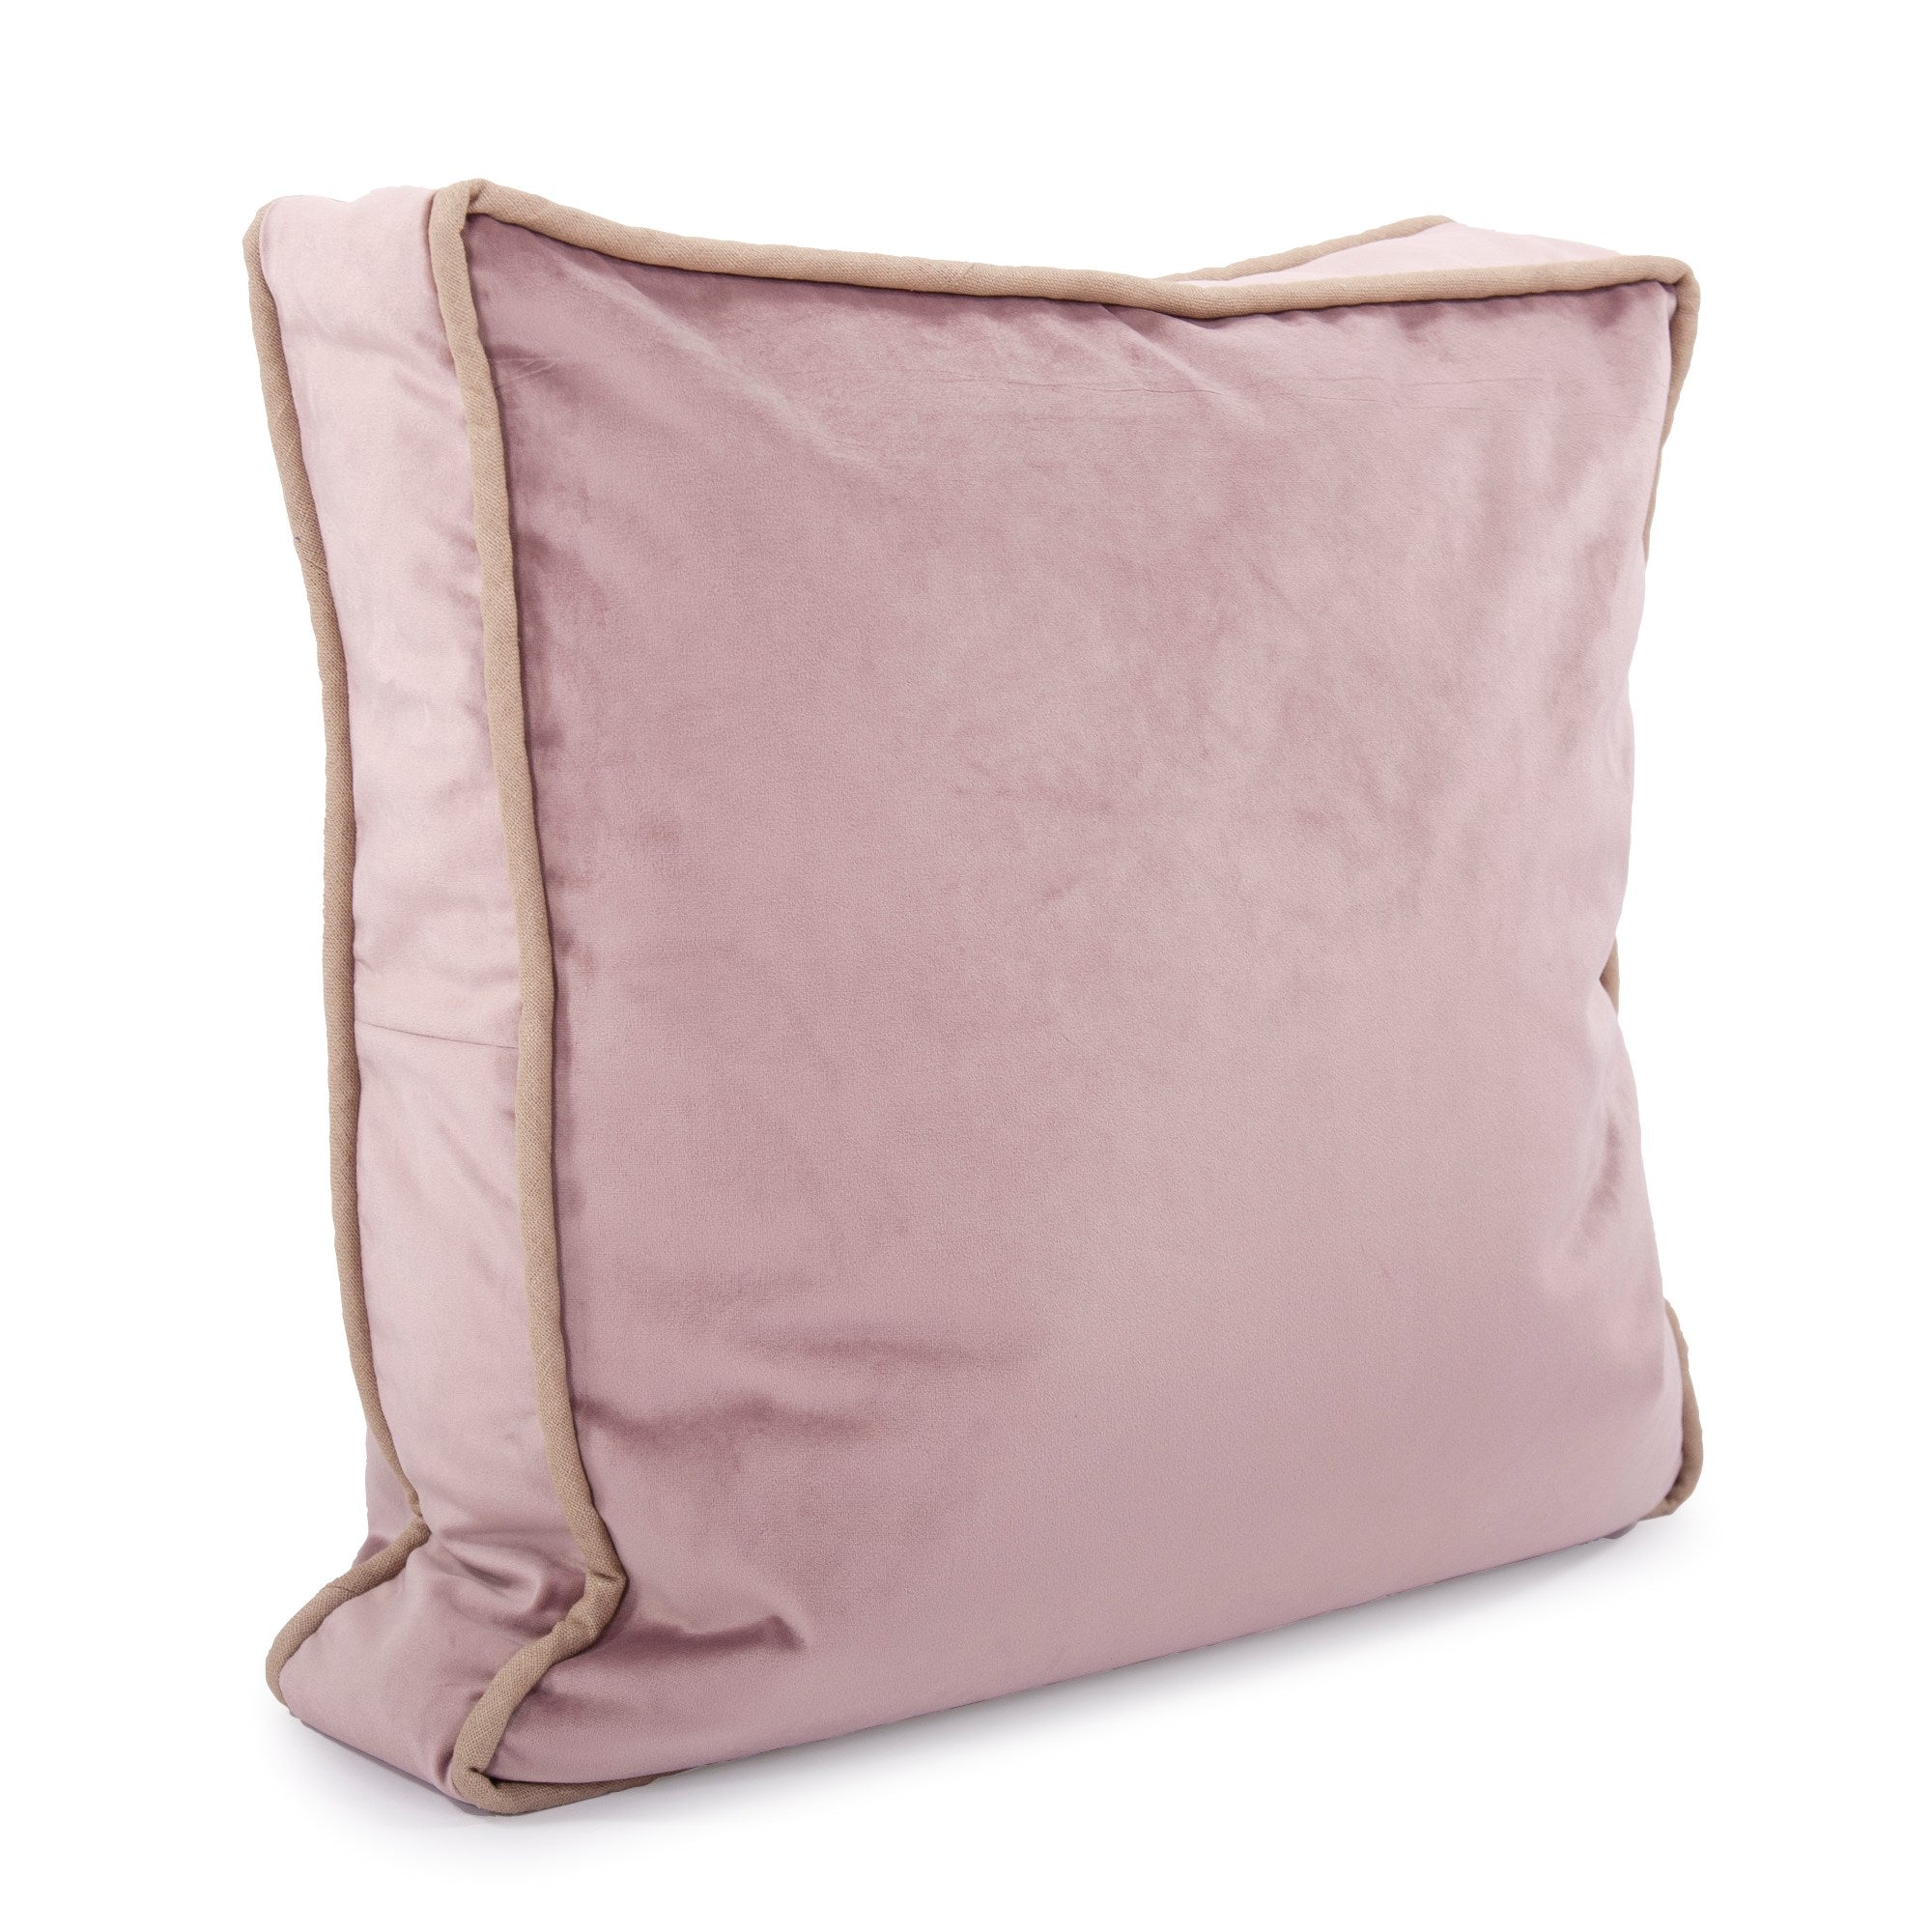 Gusseted Bella Rose Down Pillow- 20" x 20"